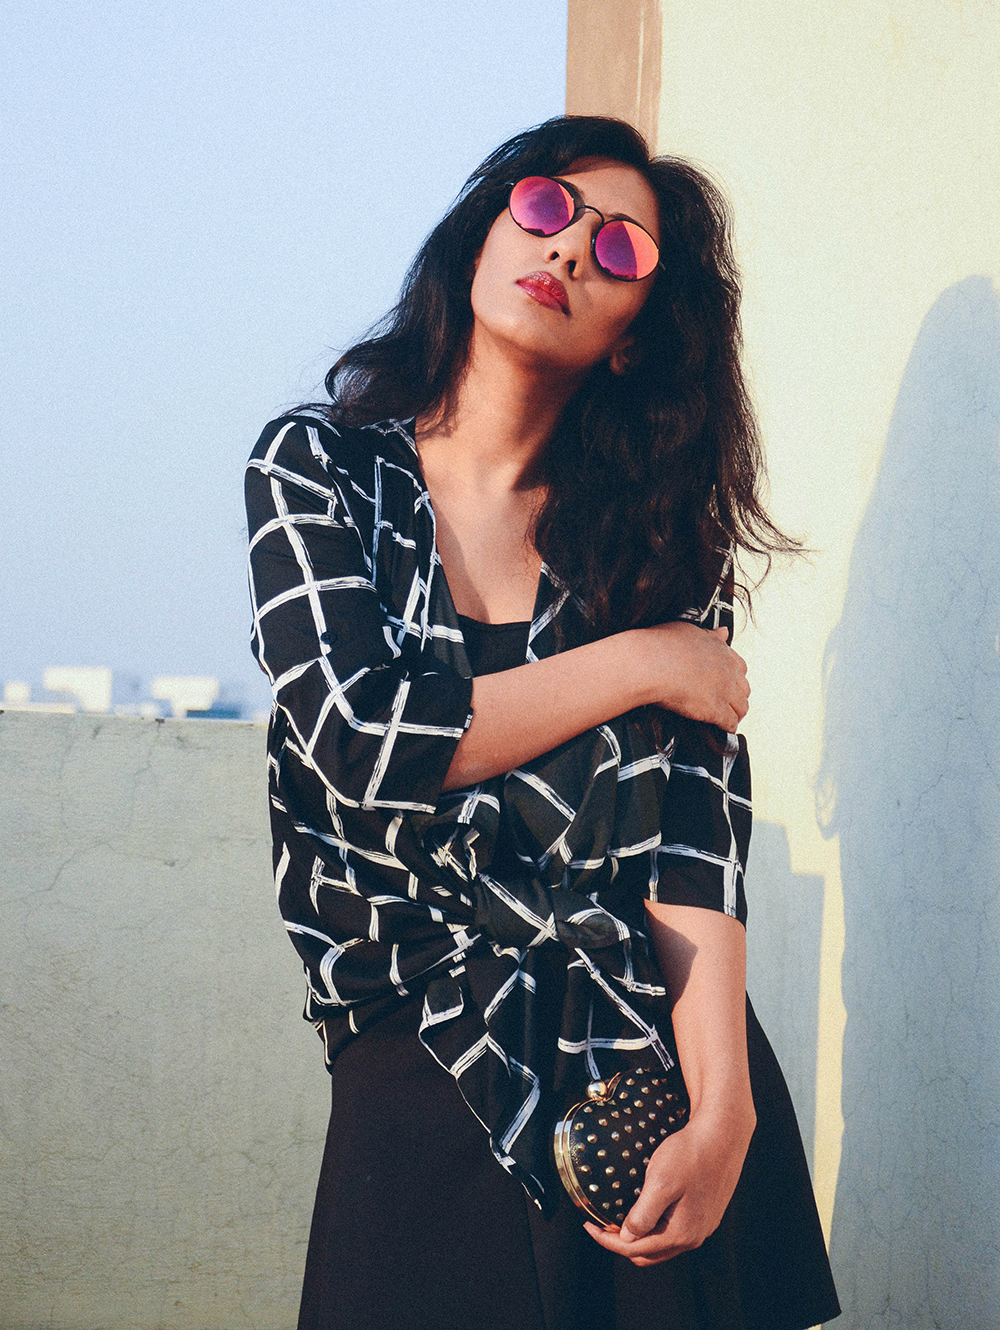 Lookbook ; The Label Life ; Black ; Summer Layering ; Checks; Tinted Glasses ; Outfit ; Lookbook ; Movie Outfit ; Hyderabad ; fashion photography ; dusk ; strong ; Dark ; summer fashion ; summer outfit ; spring ; summer 17; easy chic ; vintage ; Naznin ; Naznin Suhaer ; dusky; model ; hyderabad model ; hyderabad blogger ; indian blogger ; hyderabad fashion bloggers ; hyderabad bloggers ; hyderabad fashion blogger ; I Dress for the Applause ; 